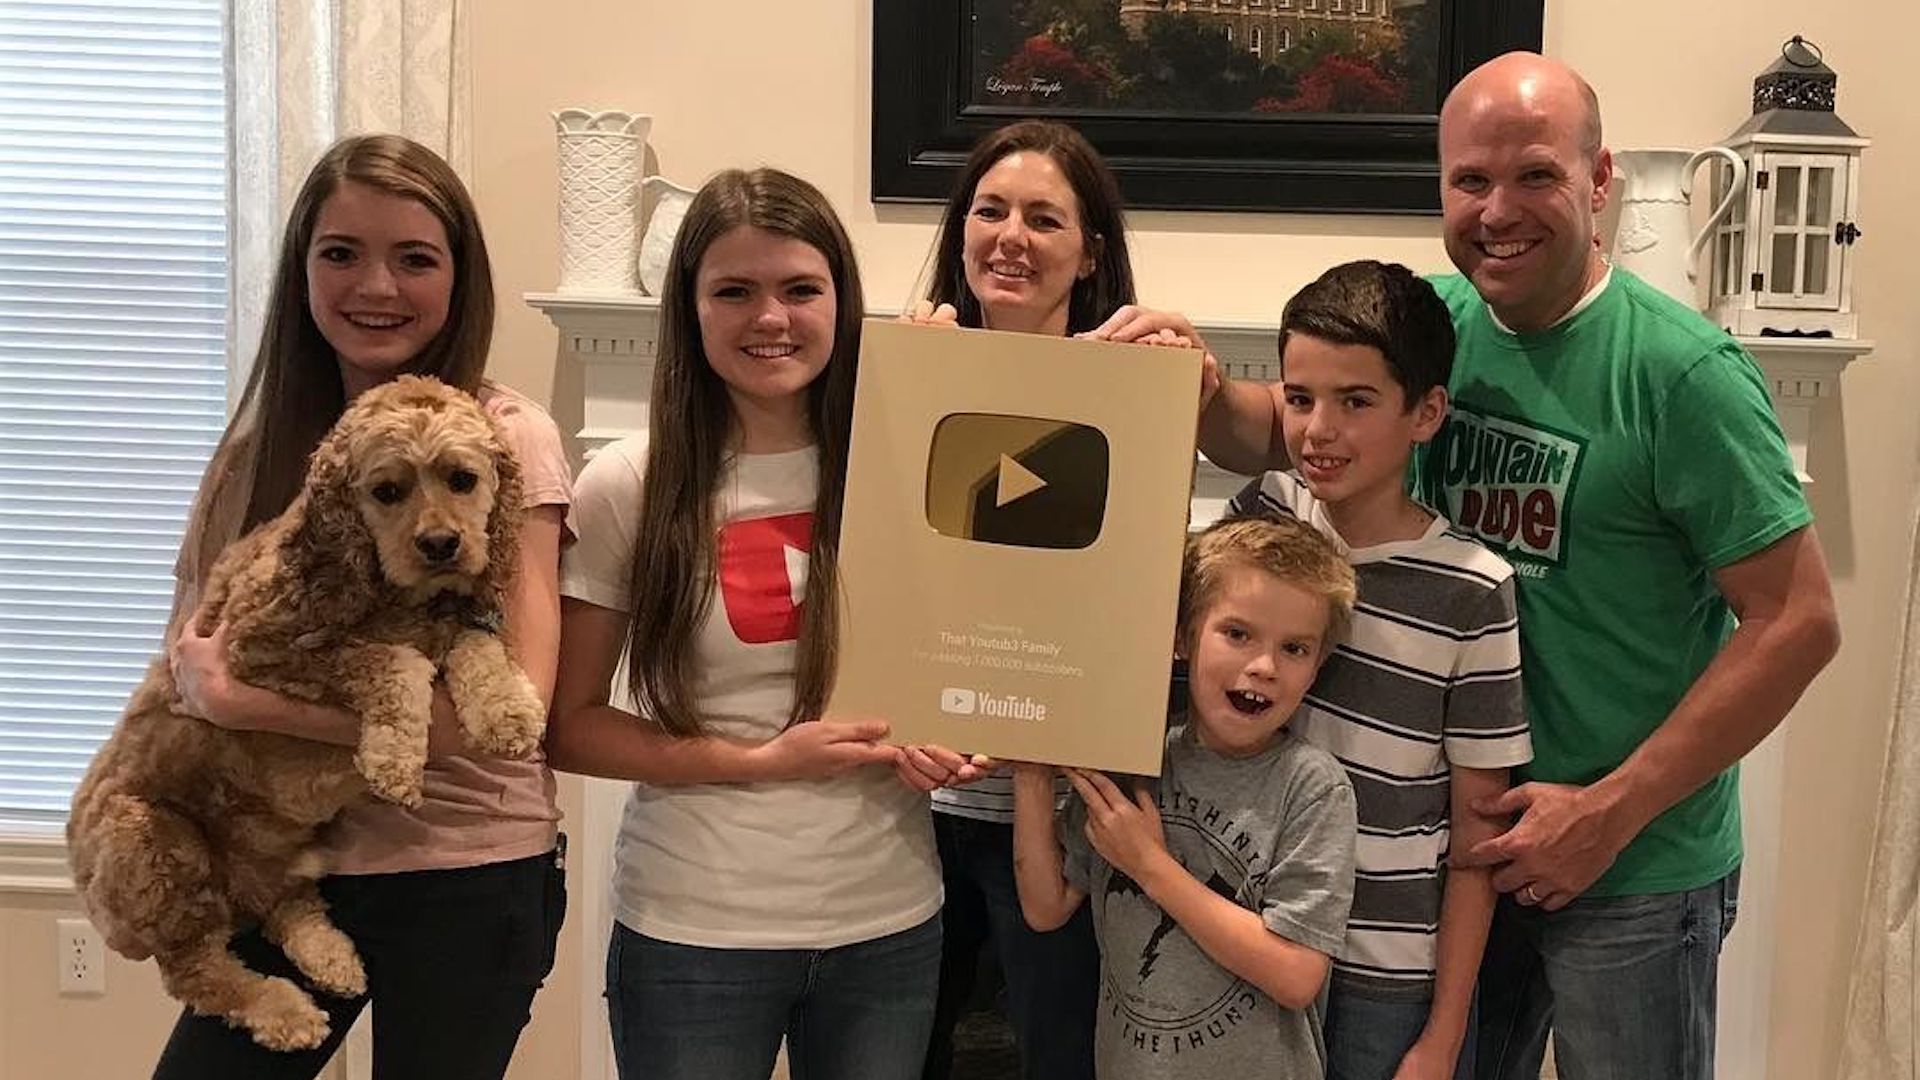 That YouTub3 Family pose with a celebratory plaque from YouTube